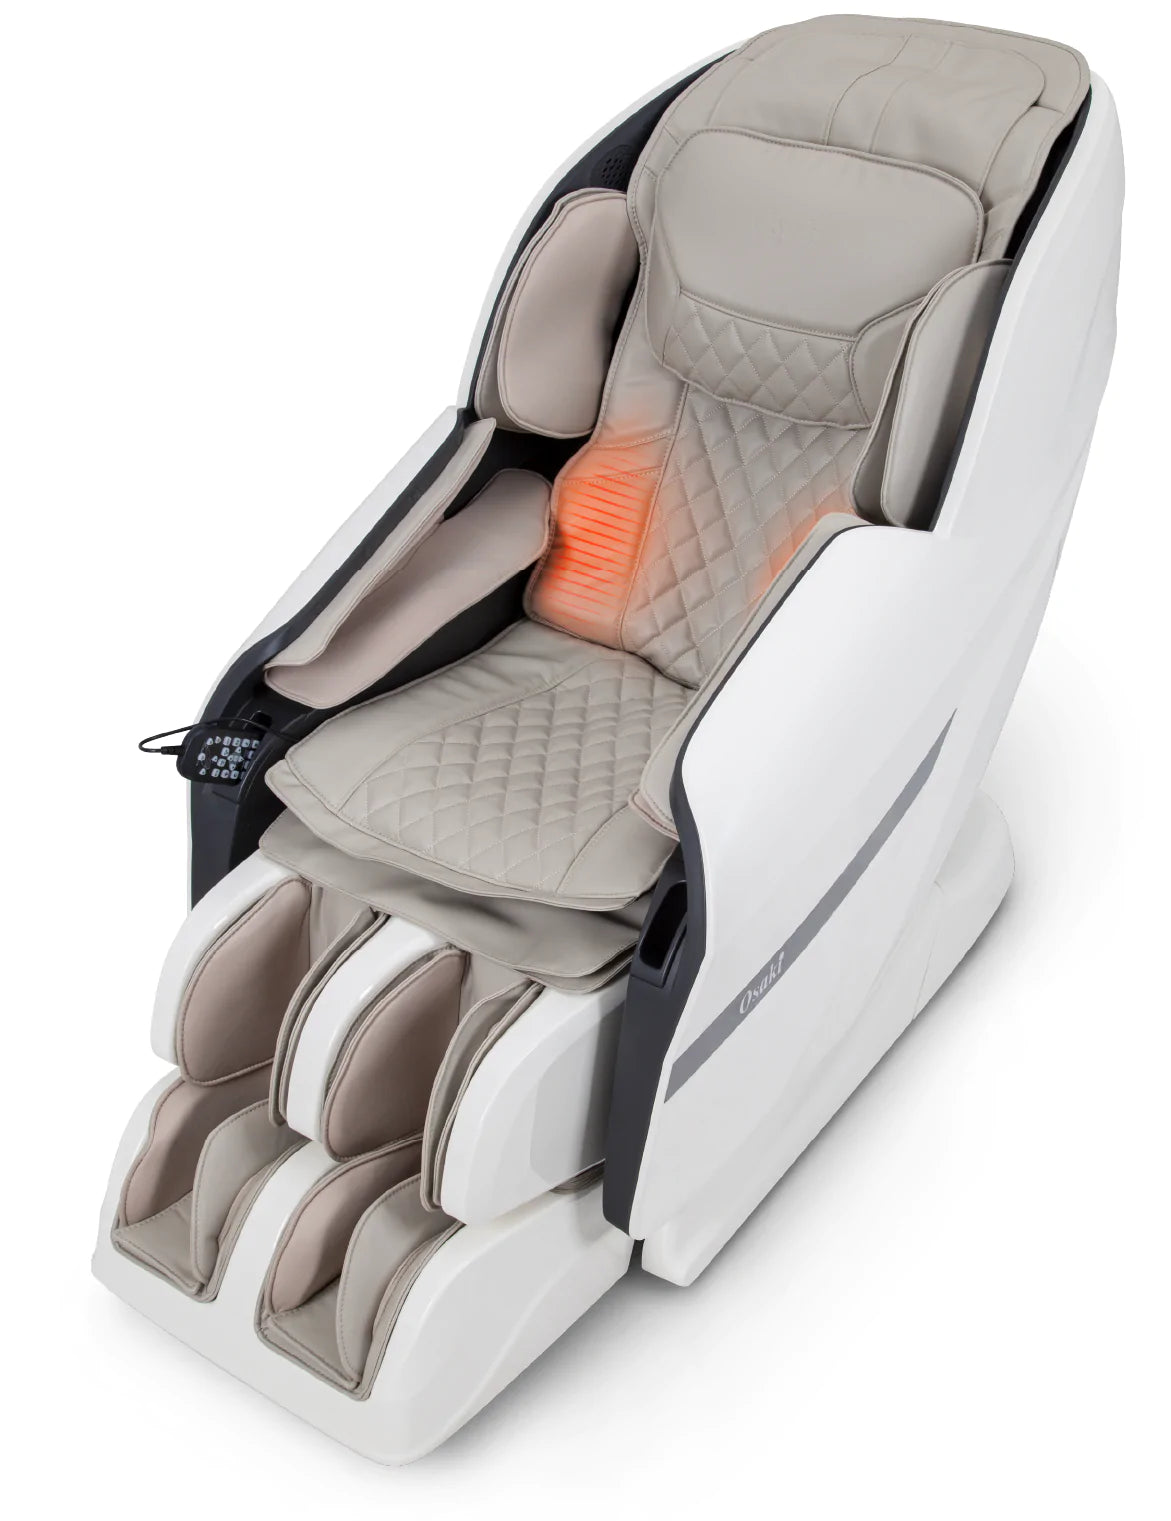 The Osaki Vista Massage Chair comes with infrared heat therapy in the lumbar region to help improve blood flow. 